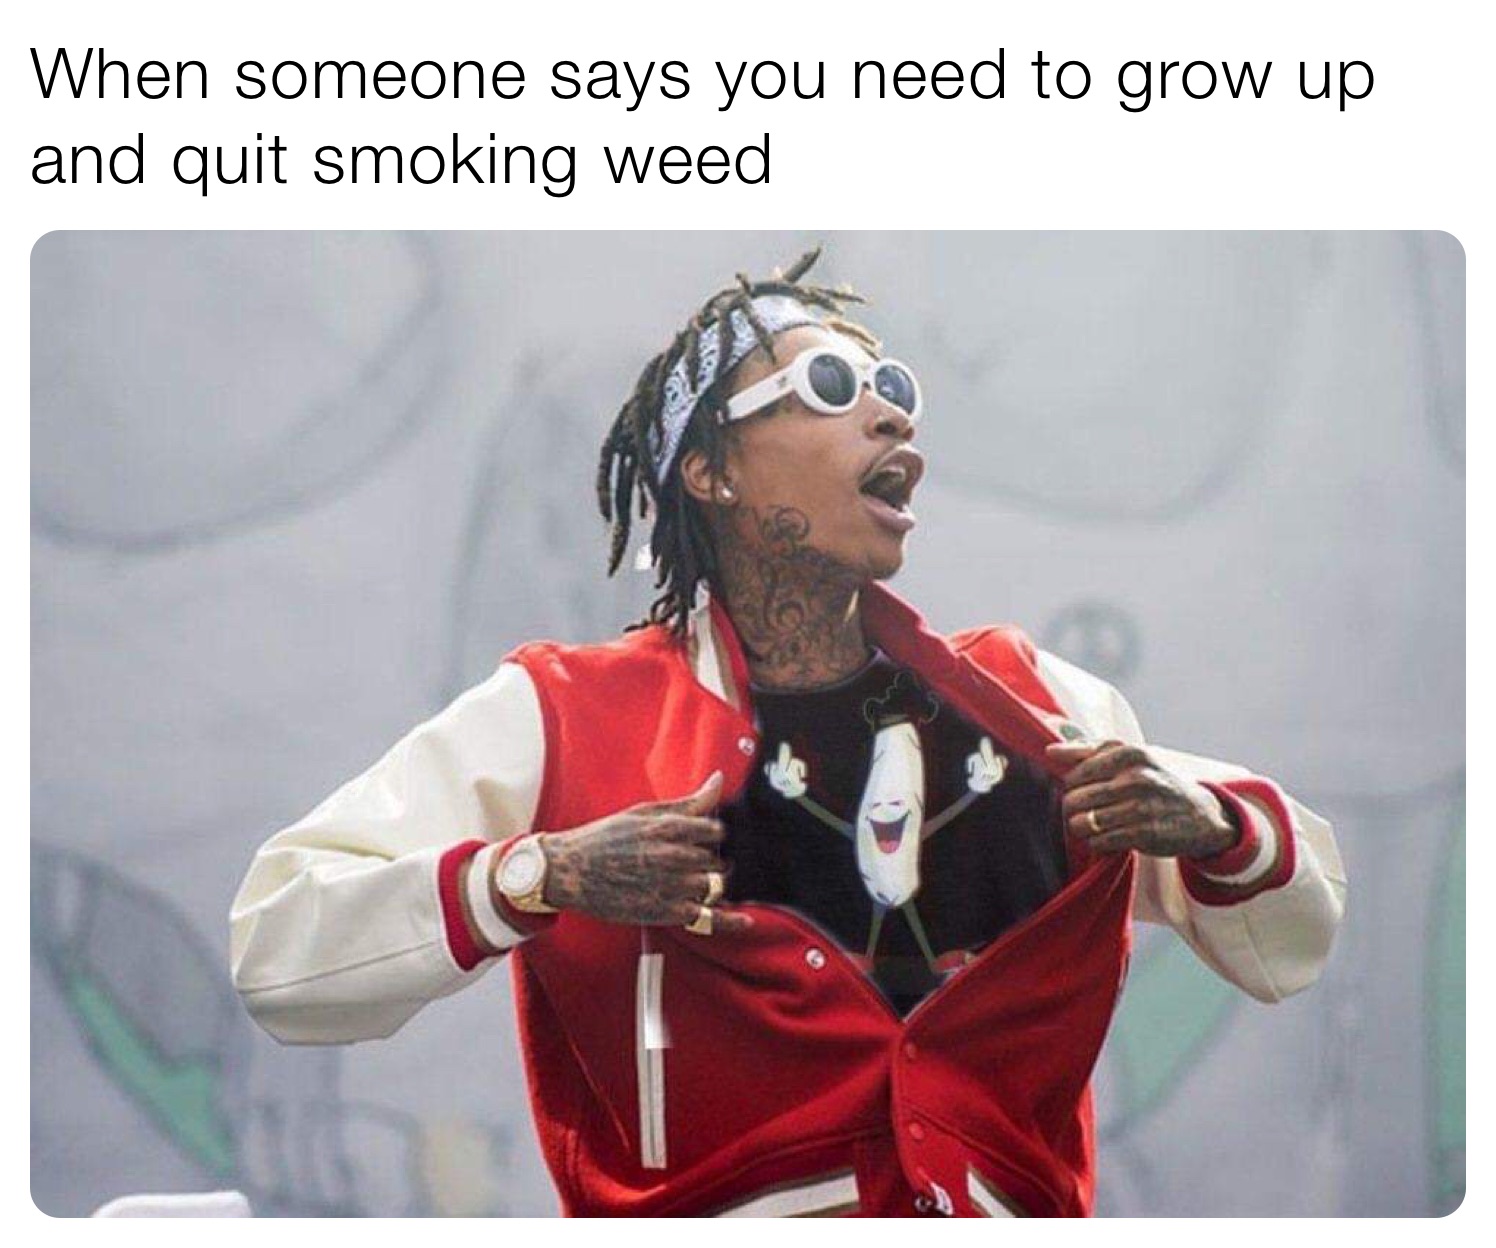 When someone says you need to grow up and quit smoking weed